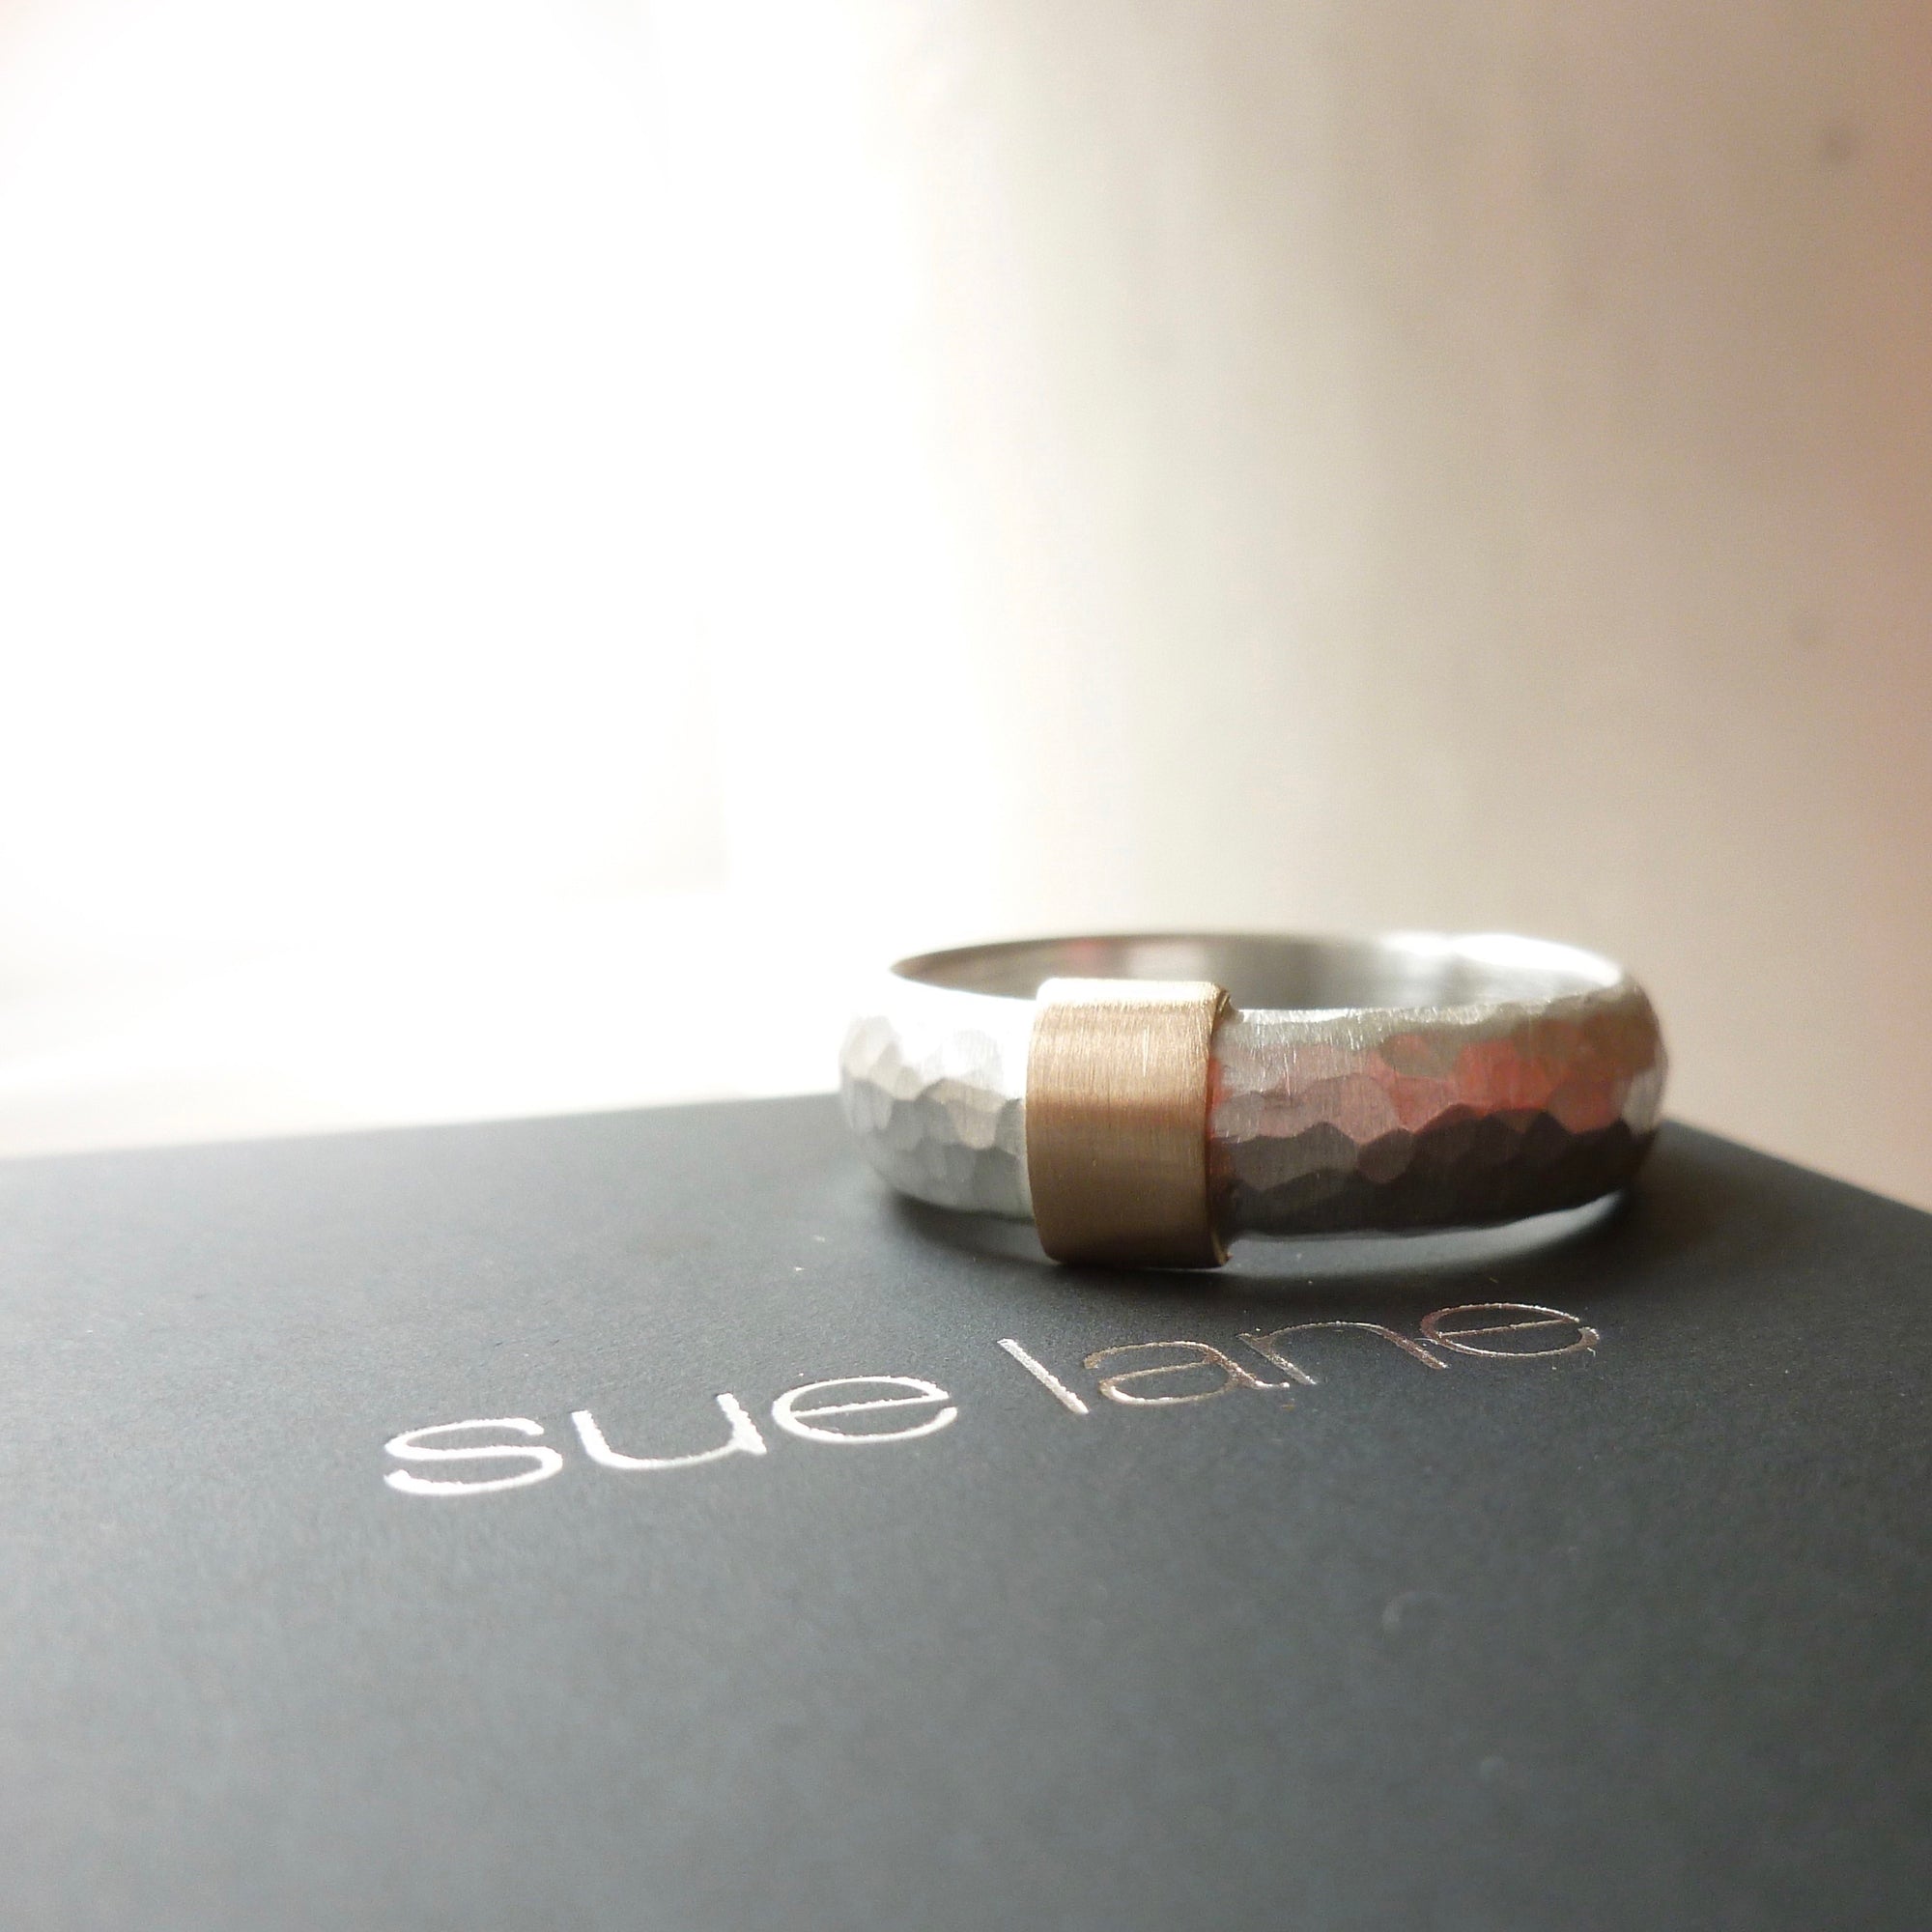 modern and unusual two tone silver and gold chinky ring for men or woman with a hammered finish. Handmade in UK